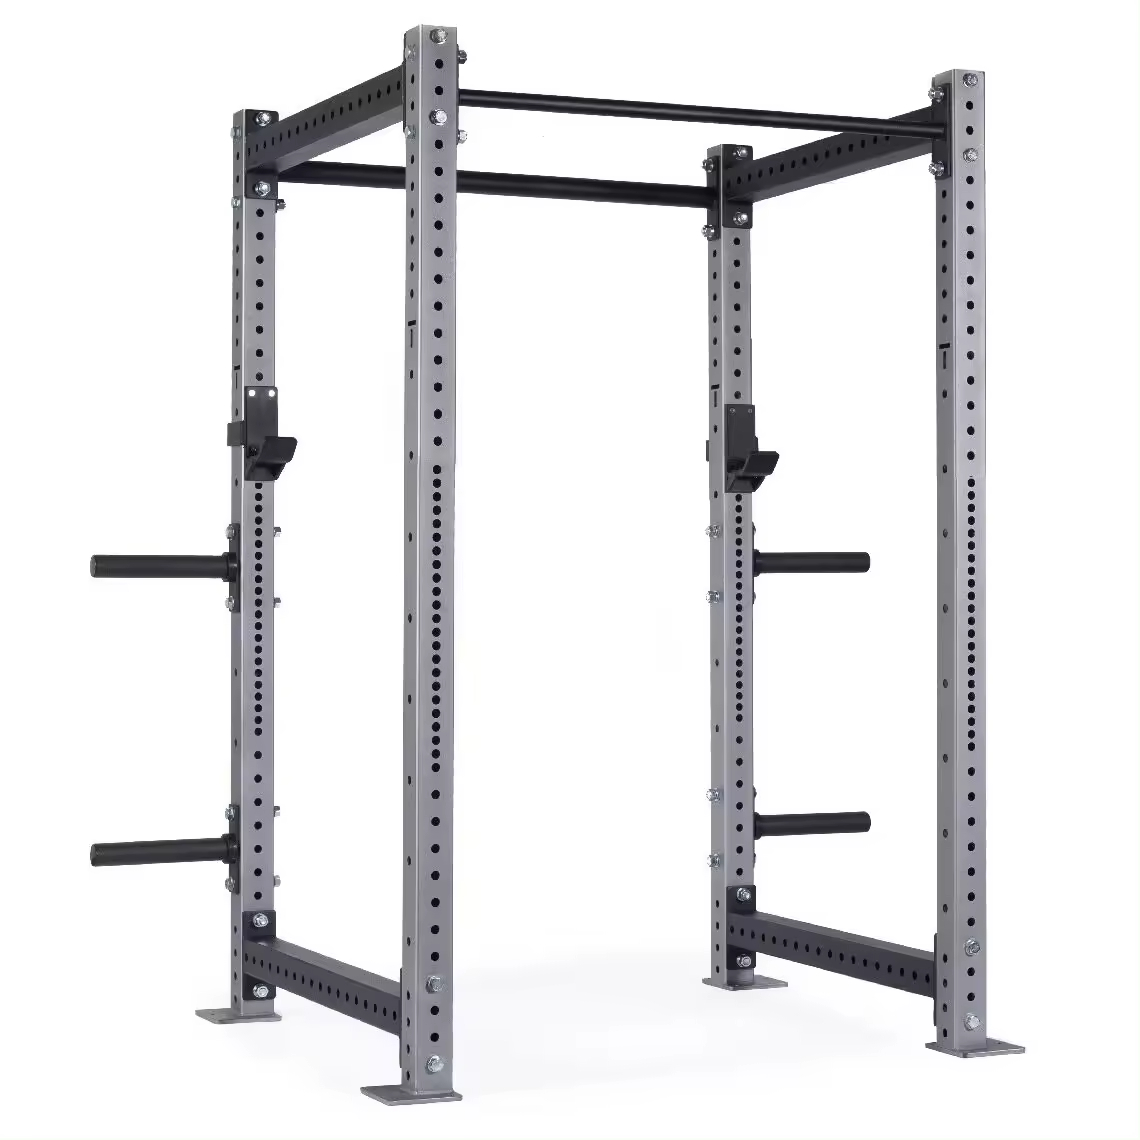 3x3 Fitness Power Rack Power Cage Squat Rack With Barbell Plate Storage Rack